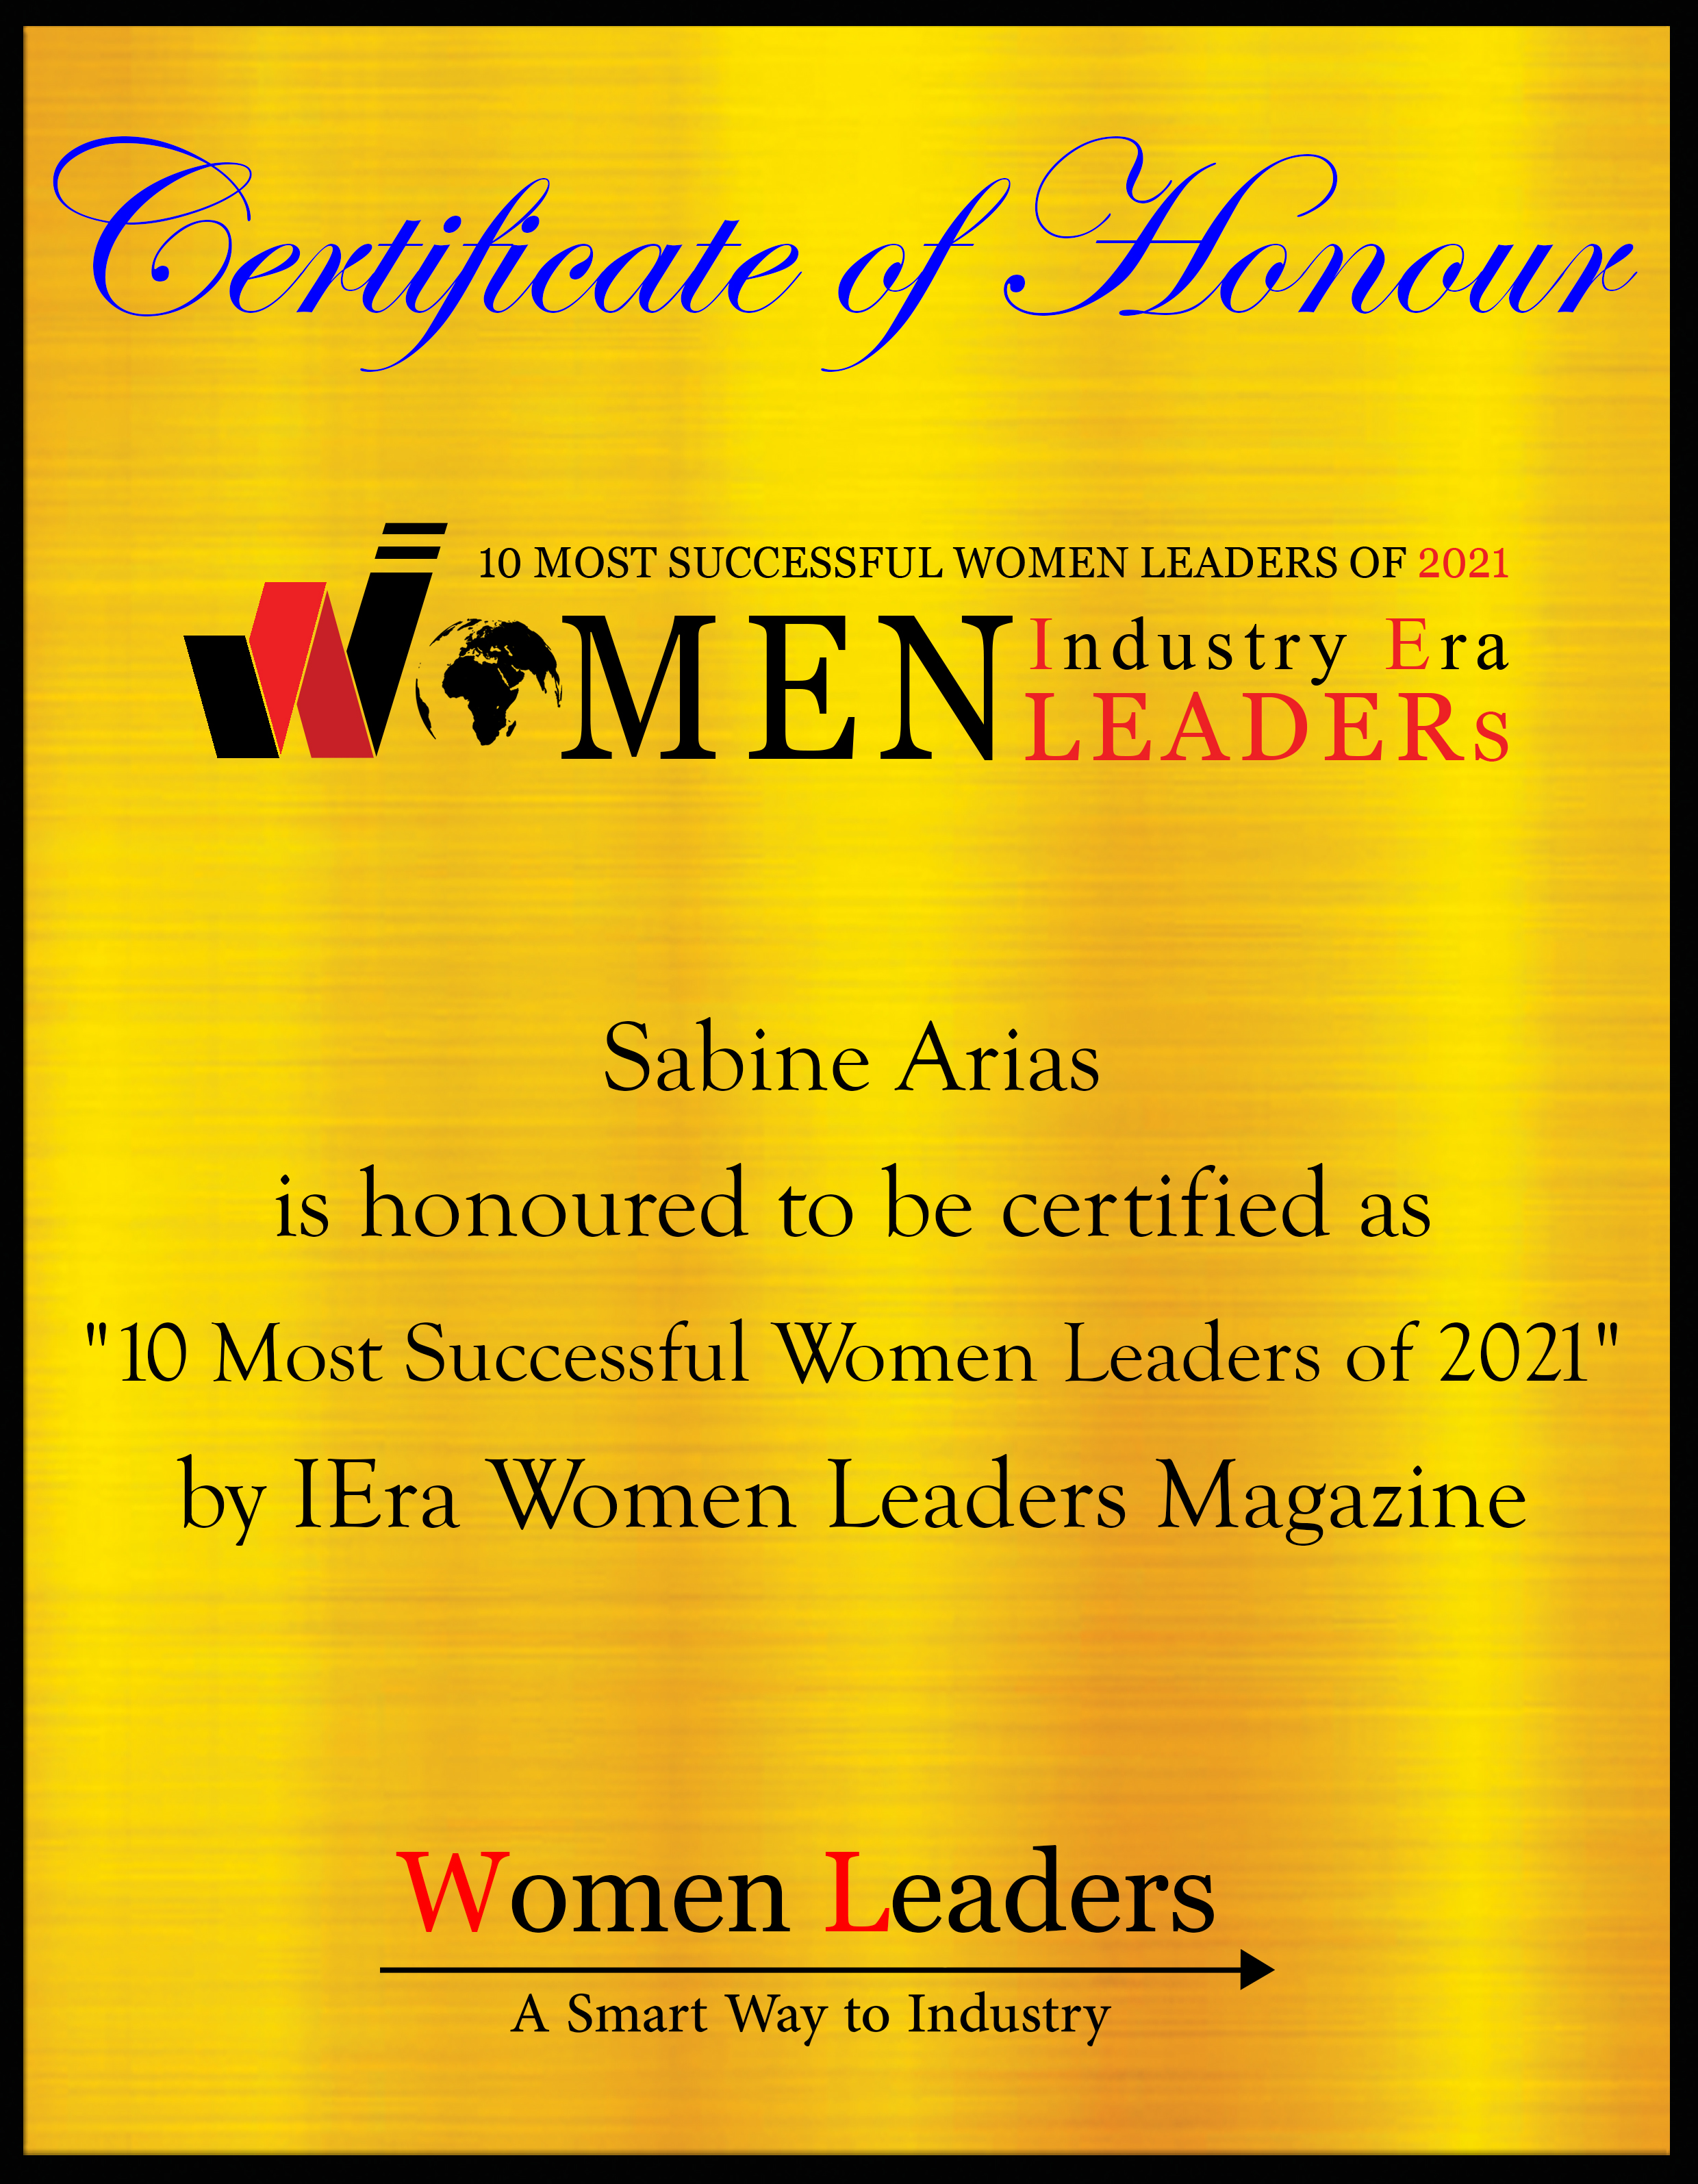 Sabine Arias, Founder and Creative Director of Sabine Arias Brand, Most Successful Women Leaders of 2021